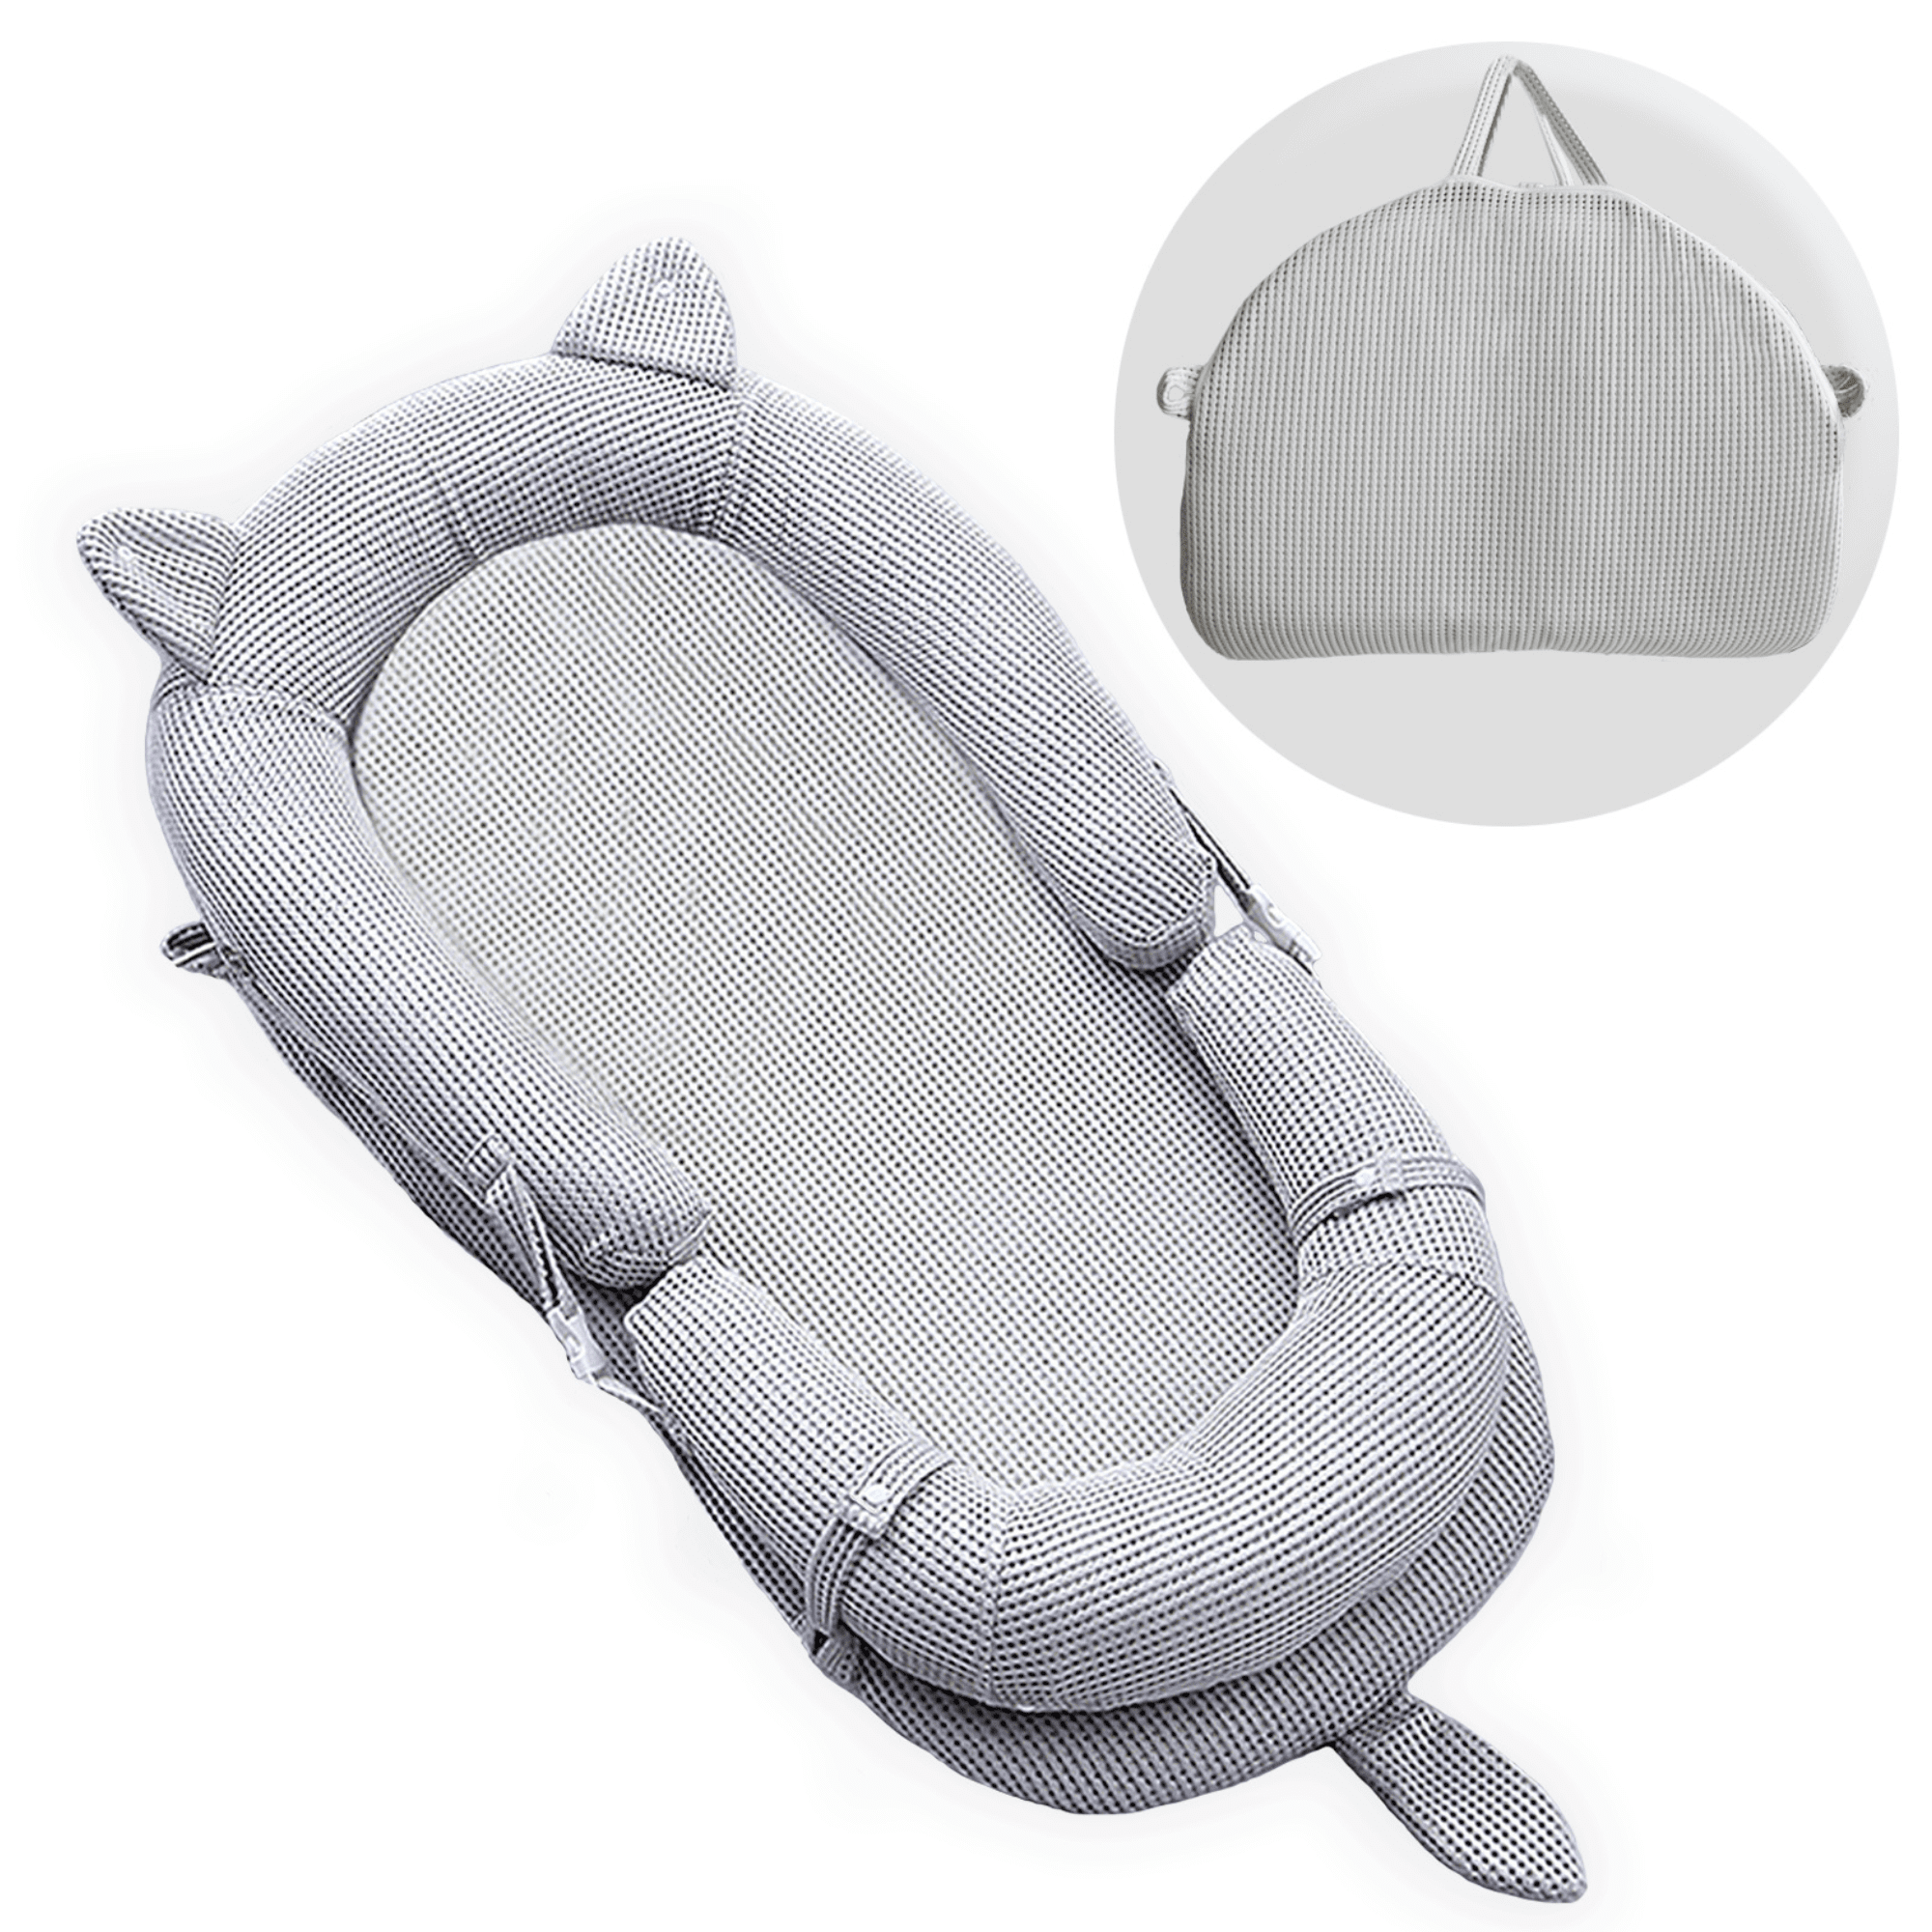 Bellababy Baby Lounger Pillow, Ultra Soft Cotton & Breathable Fiberfill  High Quality Lounger, Portable Adjustable Floor Seat for Travel, Must Have  Essentials 